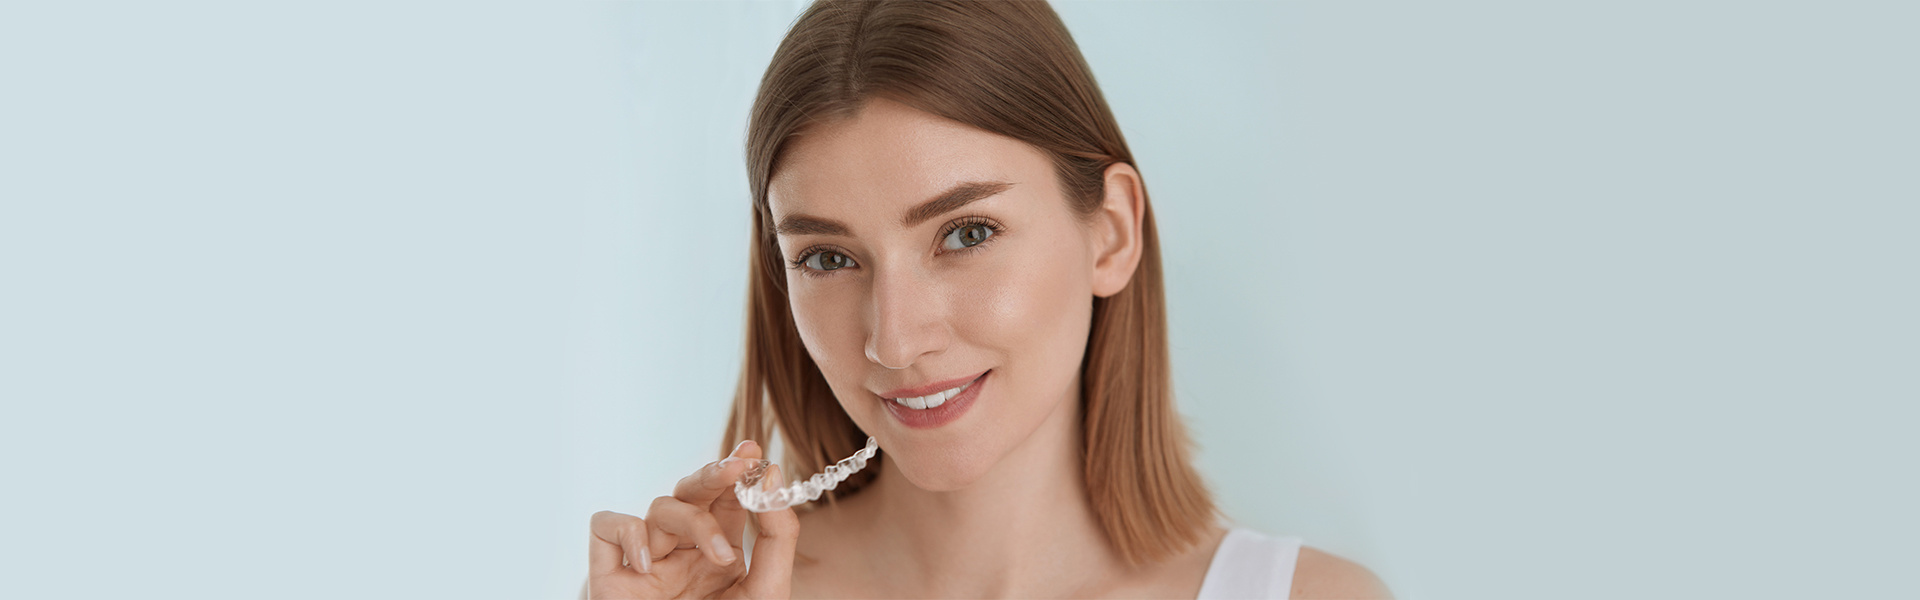 Invisalign Aligners 101: Eight Common Questions Answered